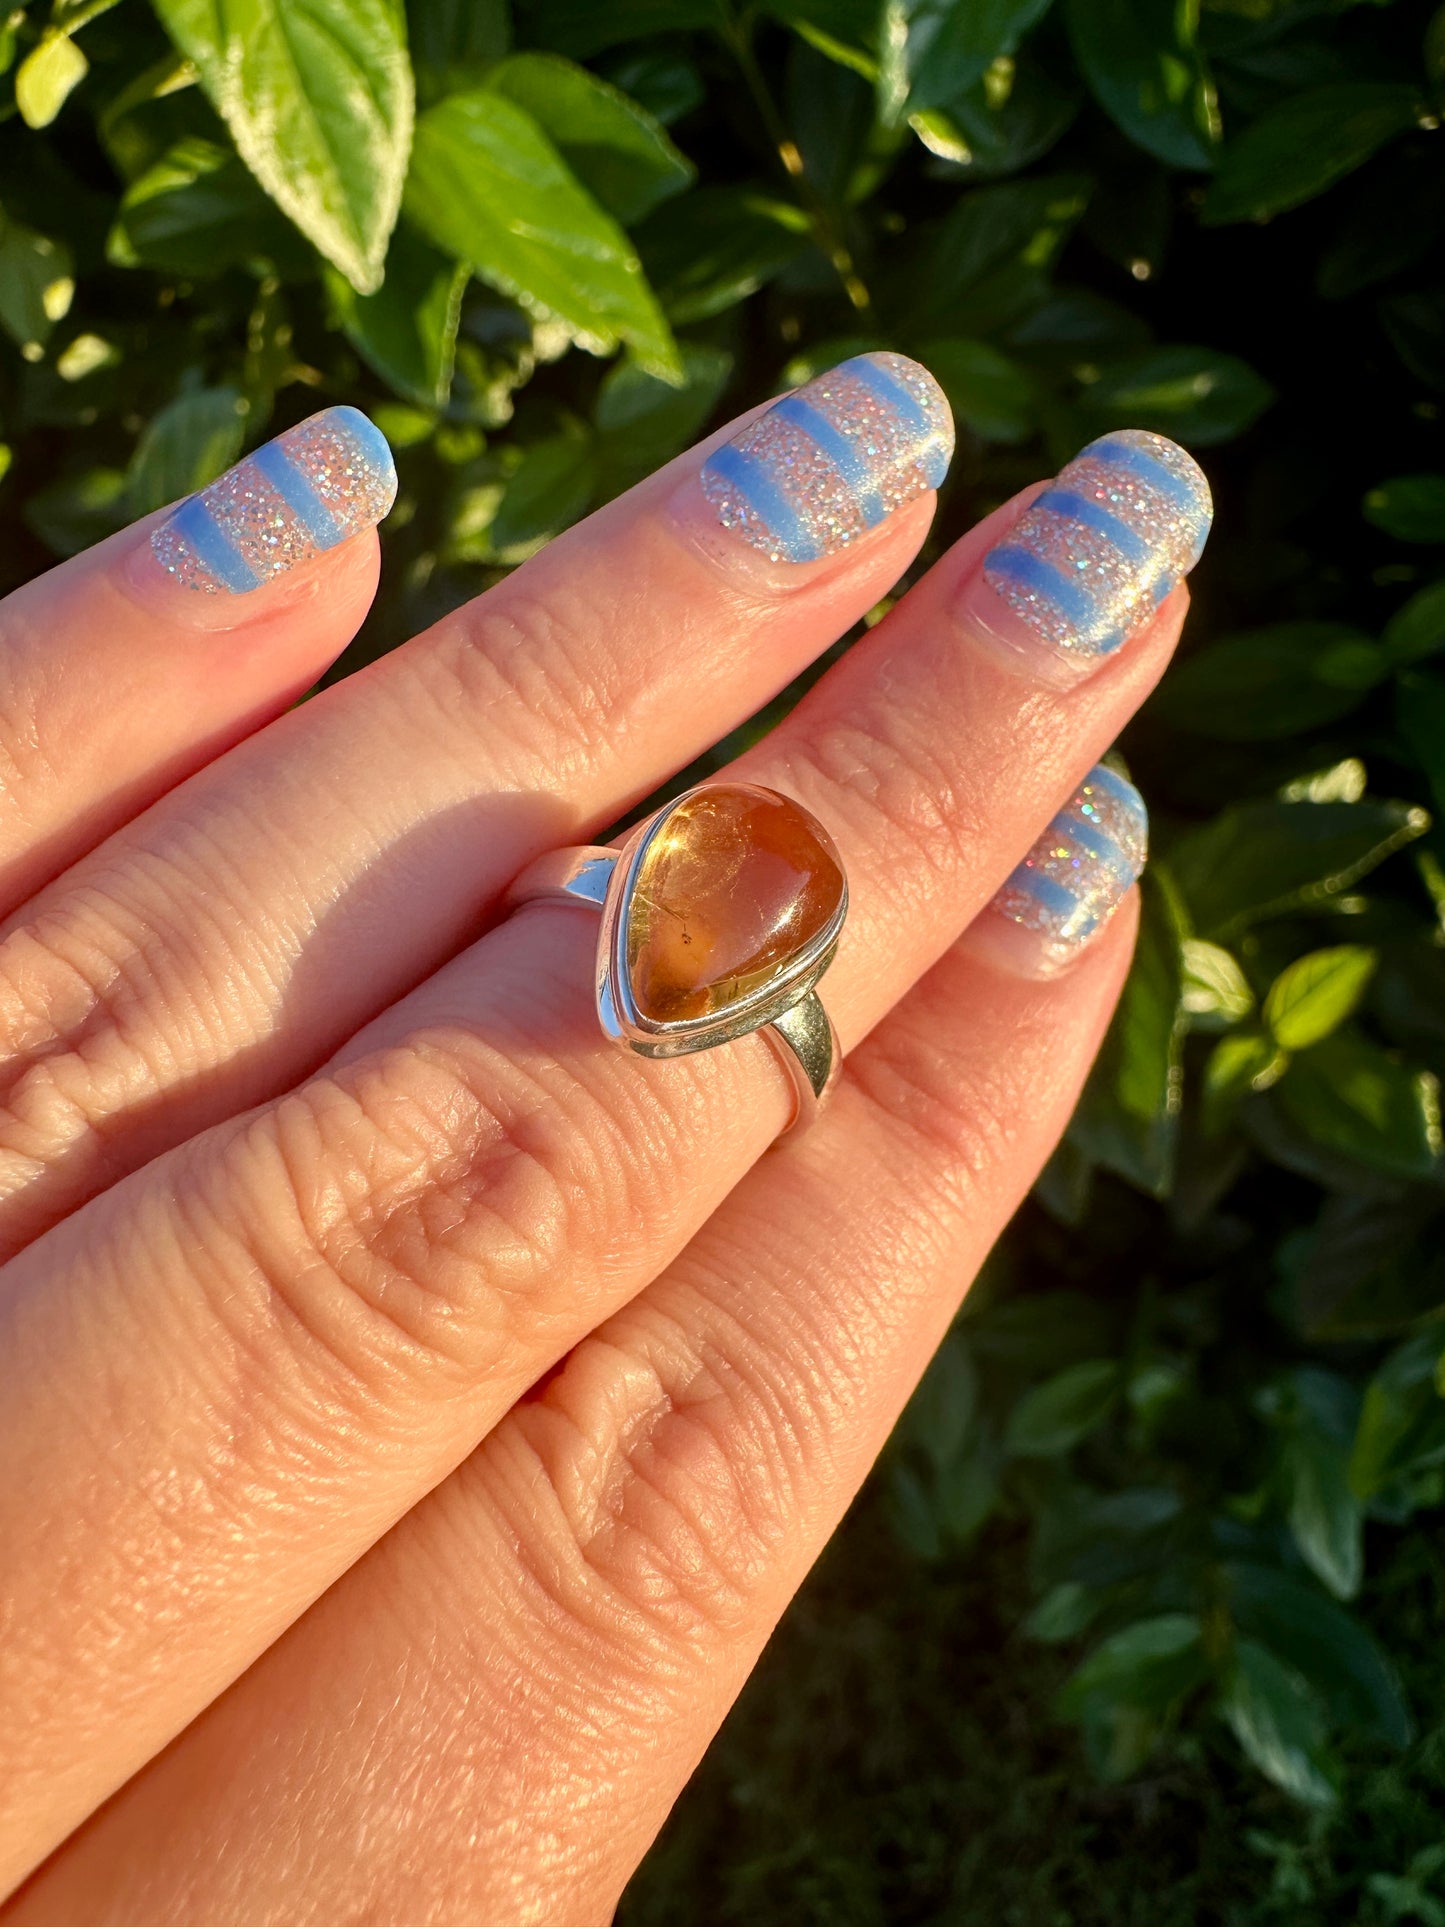 Citrine Sterling Silver Ring Size 7.25 - Elegant Jewelry for Prosperity and Joy, Perfect for Enhancing Positive Energy and Personal Style